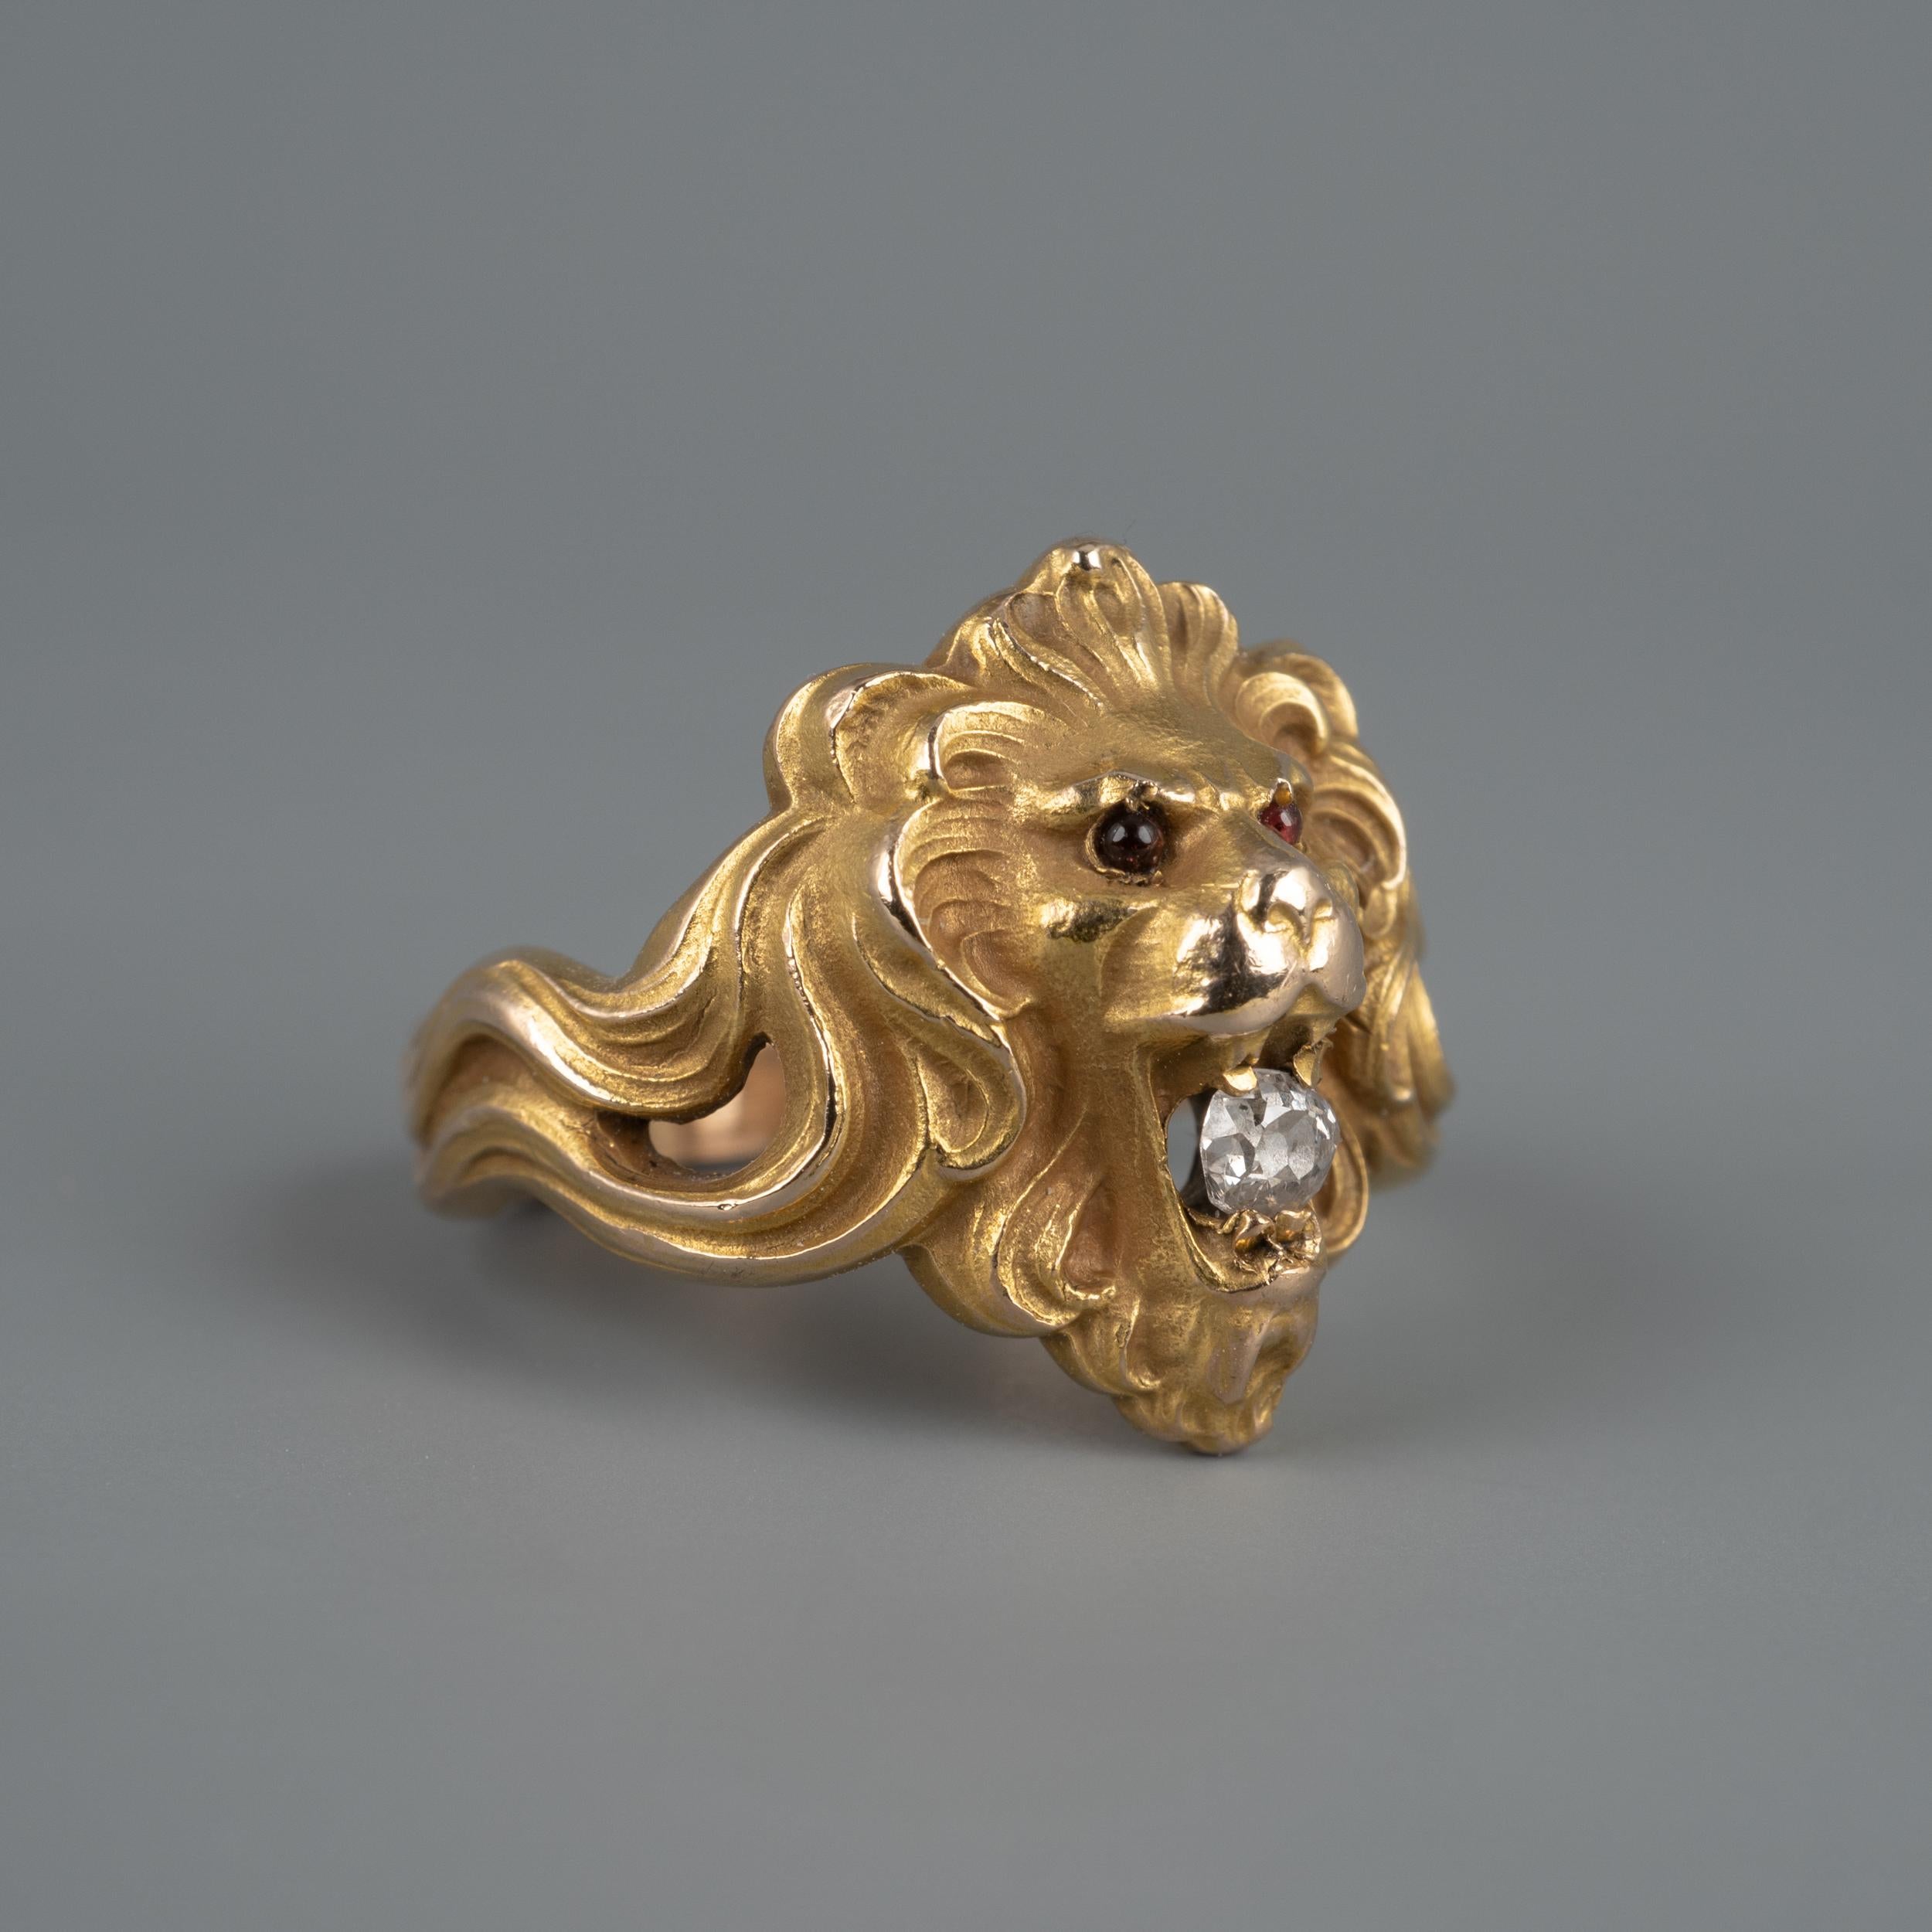 This superb antique Art Nouveau gold Lion ring features a rose-cut diamond in mouth and cabochon garnets. Circa 1890.

Presented in good condition throughout as per pictures.

Ring size: UK/AU size K  US size 5.5
Gemstones: Old rose-cut of approx